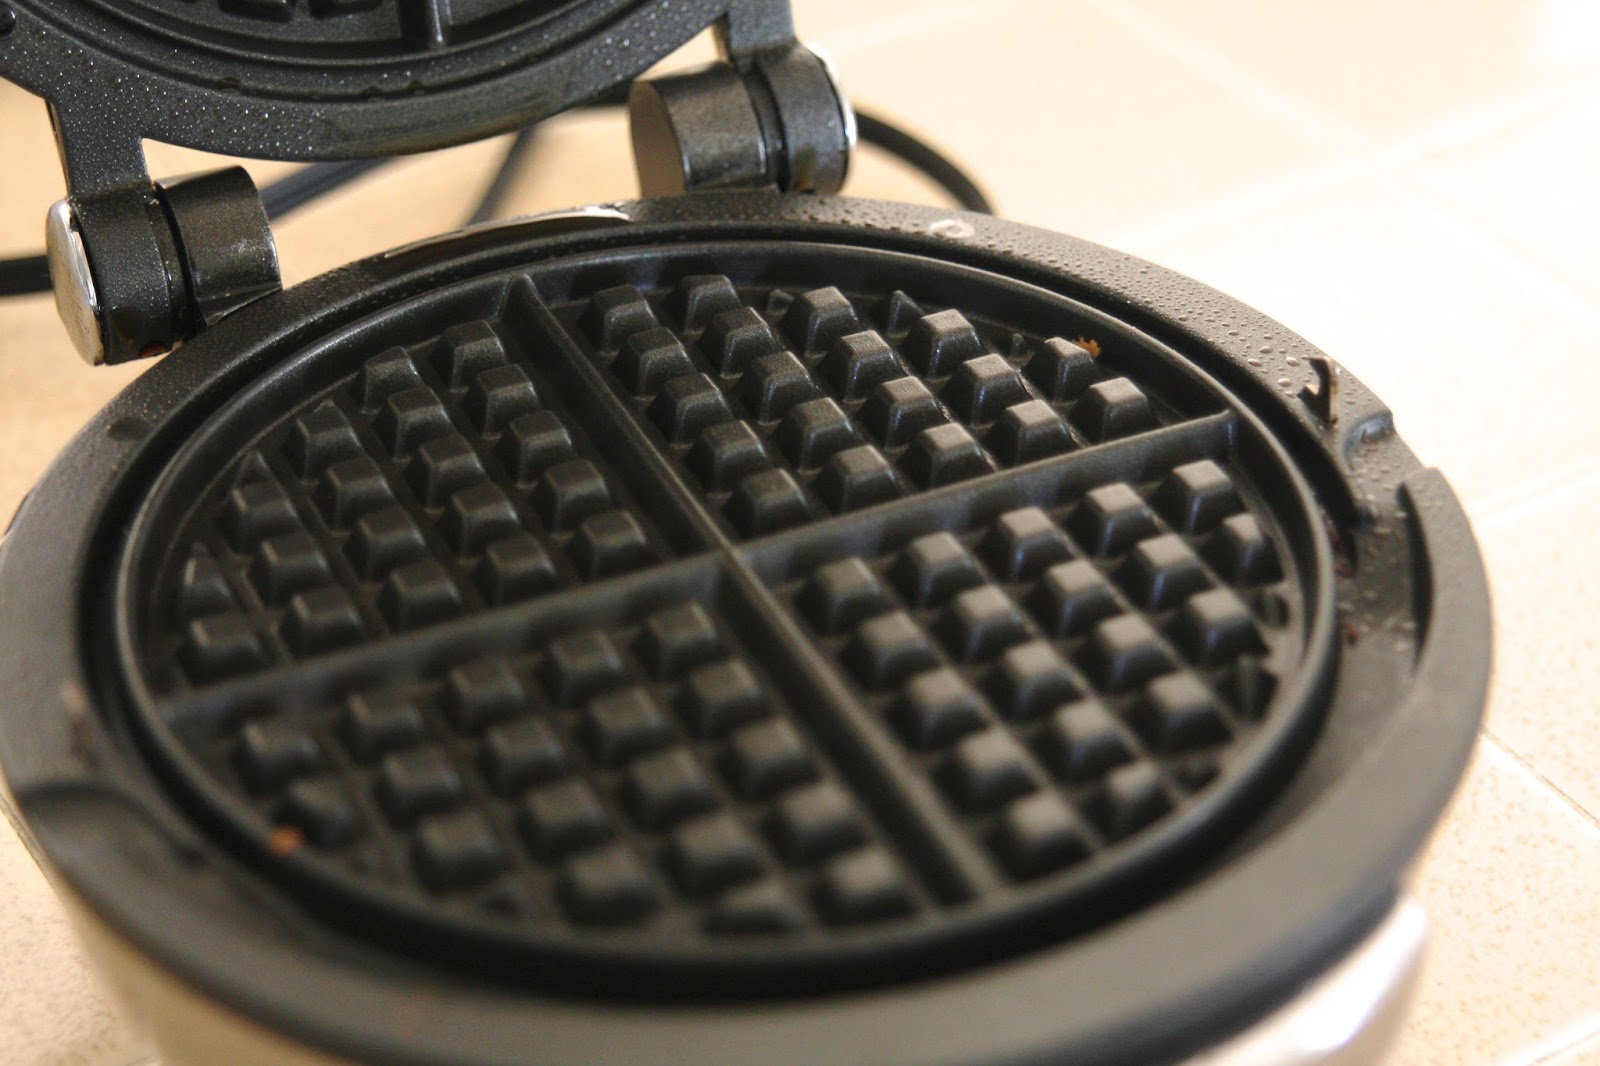 How To Clean a Waffle Iron with Non-Removable Plates - Simply